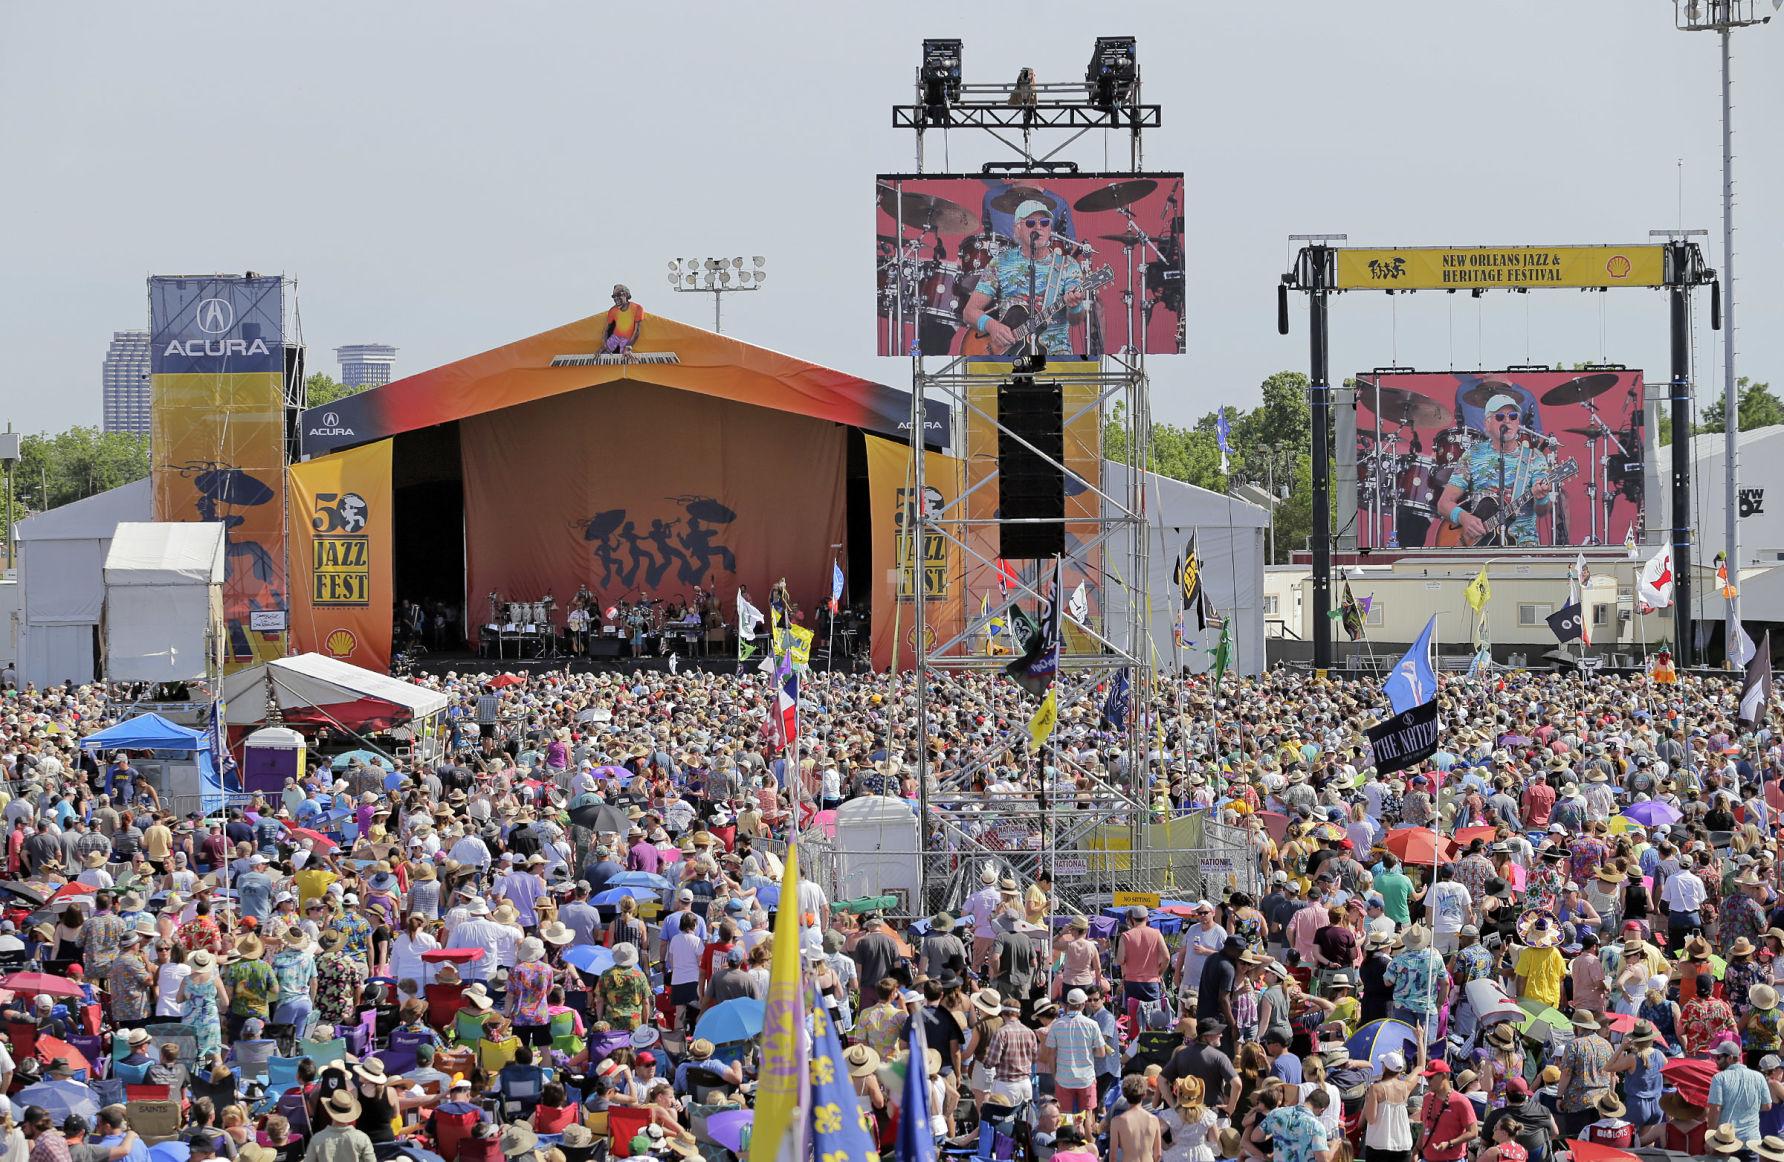 New Orleans Jazz & Heritage Festival 2020 postponed to fall | Music